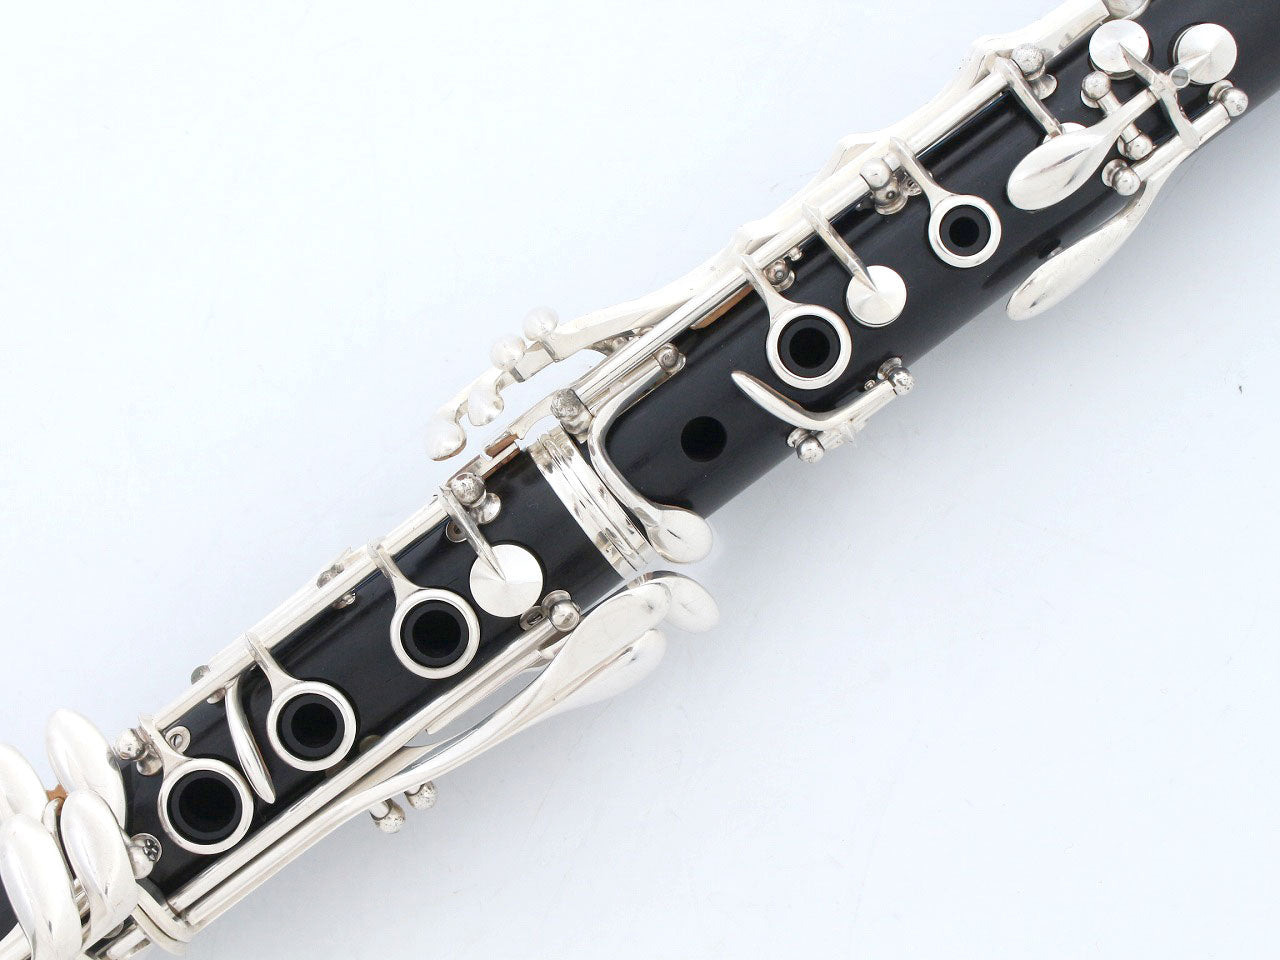 [SN 266725] USED Buffet Crampon / B flat clarinet R13SP, all tampos replaced [09]